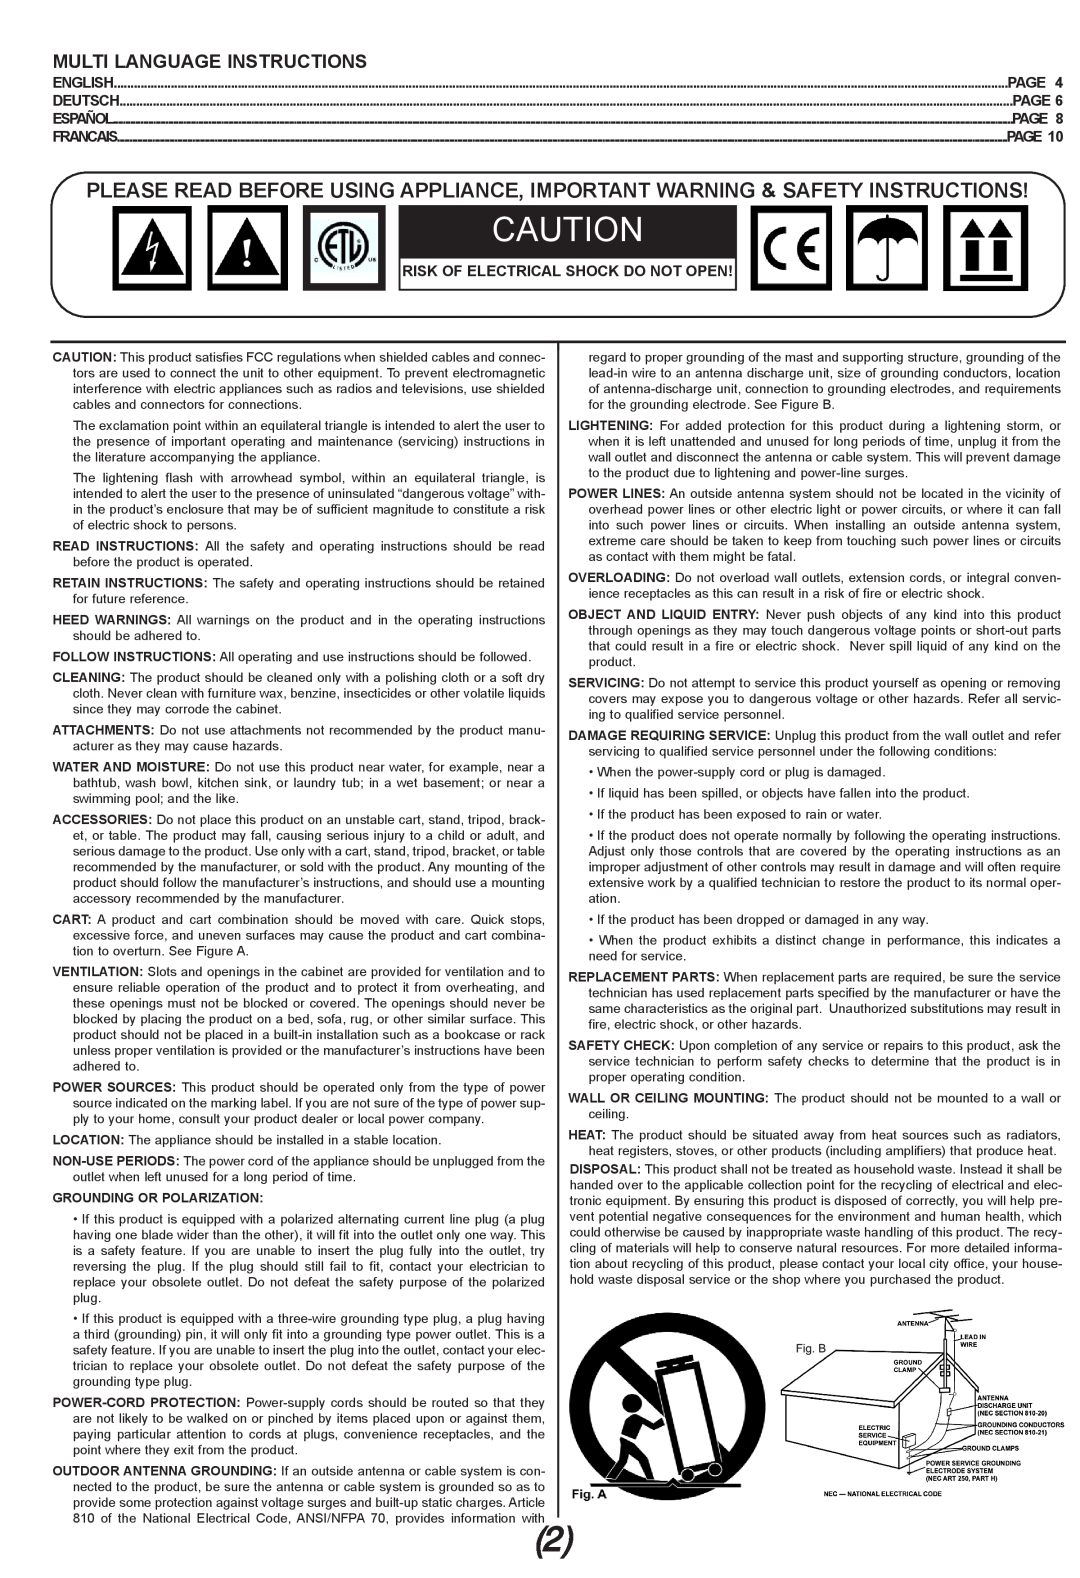 Gemini CD-150 manual Multi Language Instructions, Page, Risk Of Electrical Shock Do Not Open 